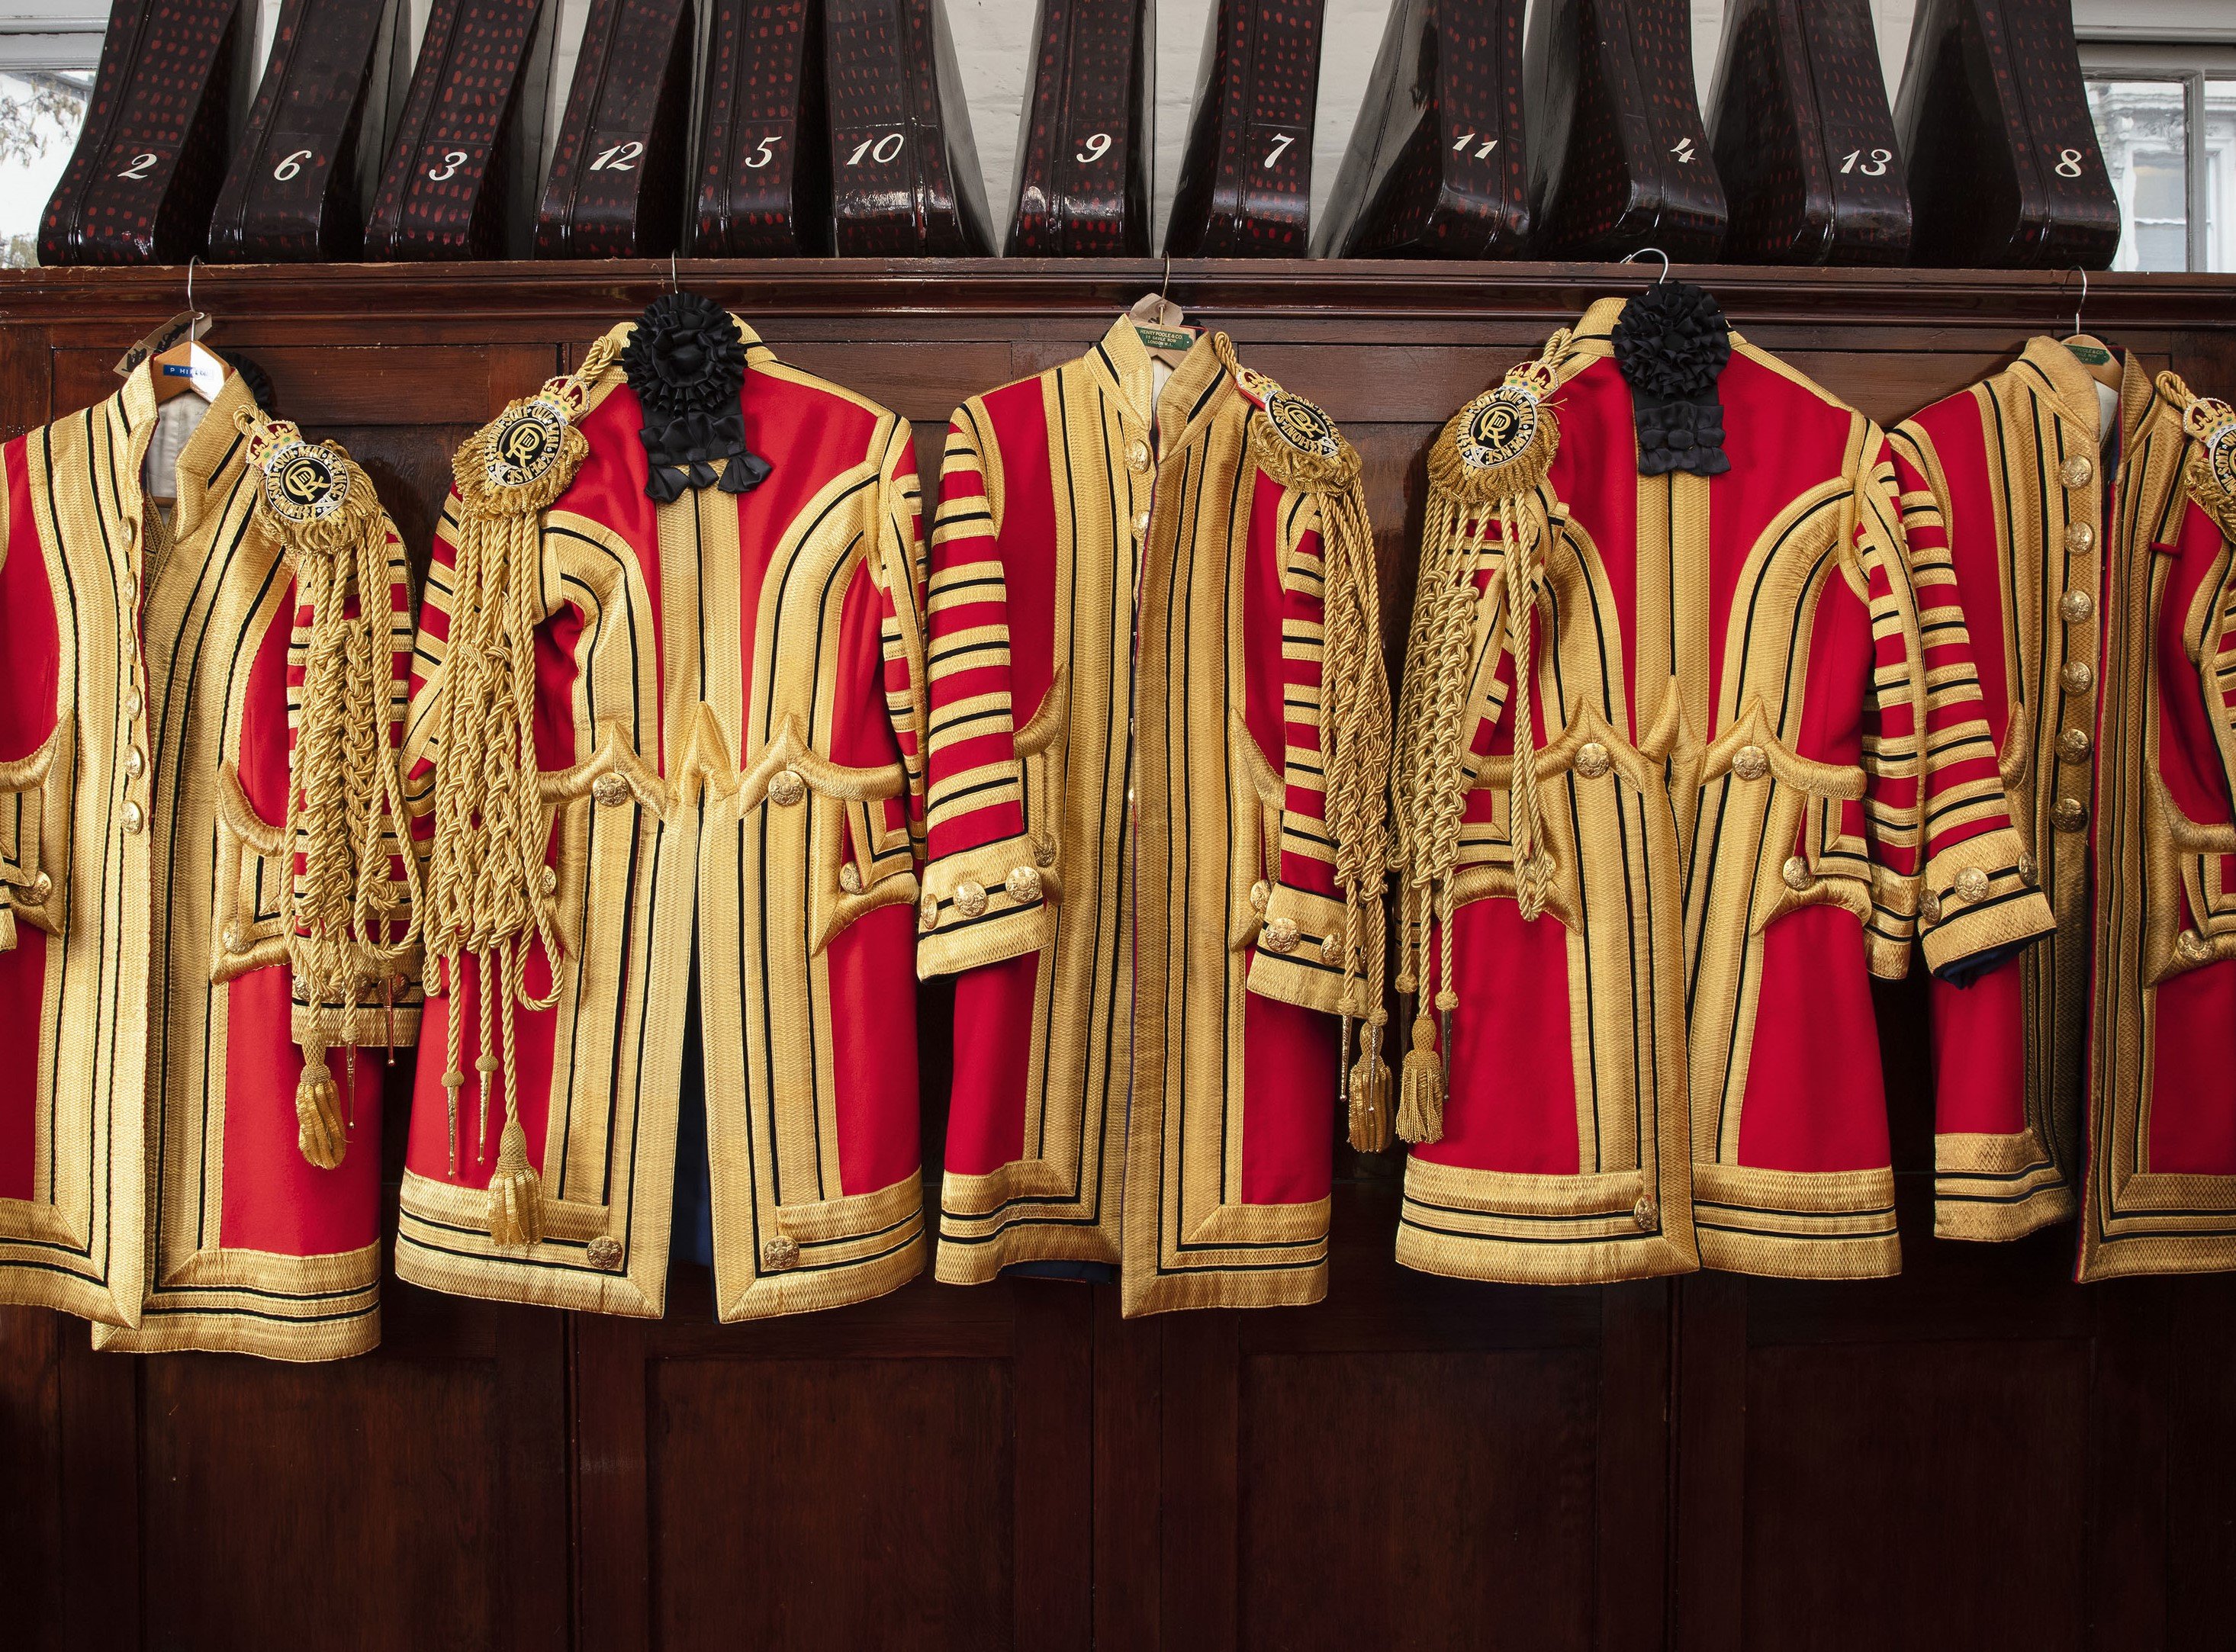 Five red livery uniforms with black and gold hang up